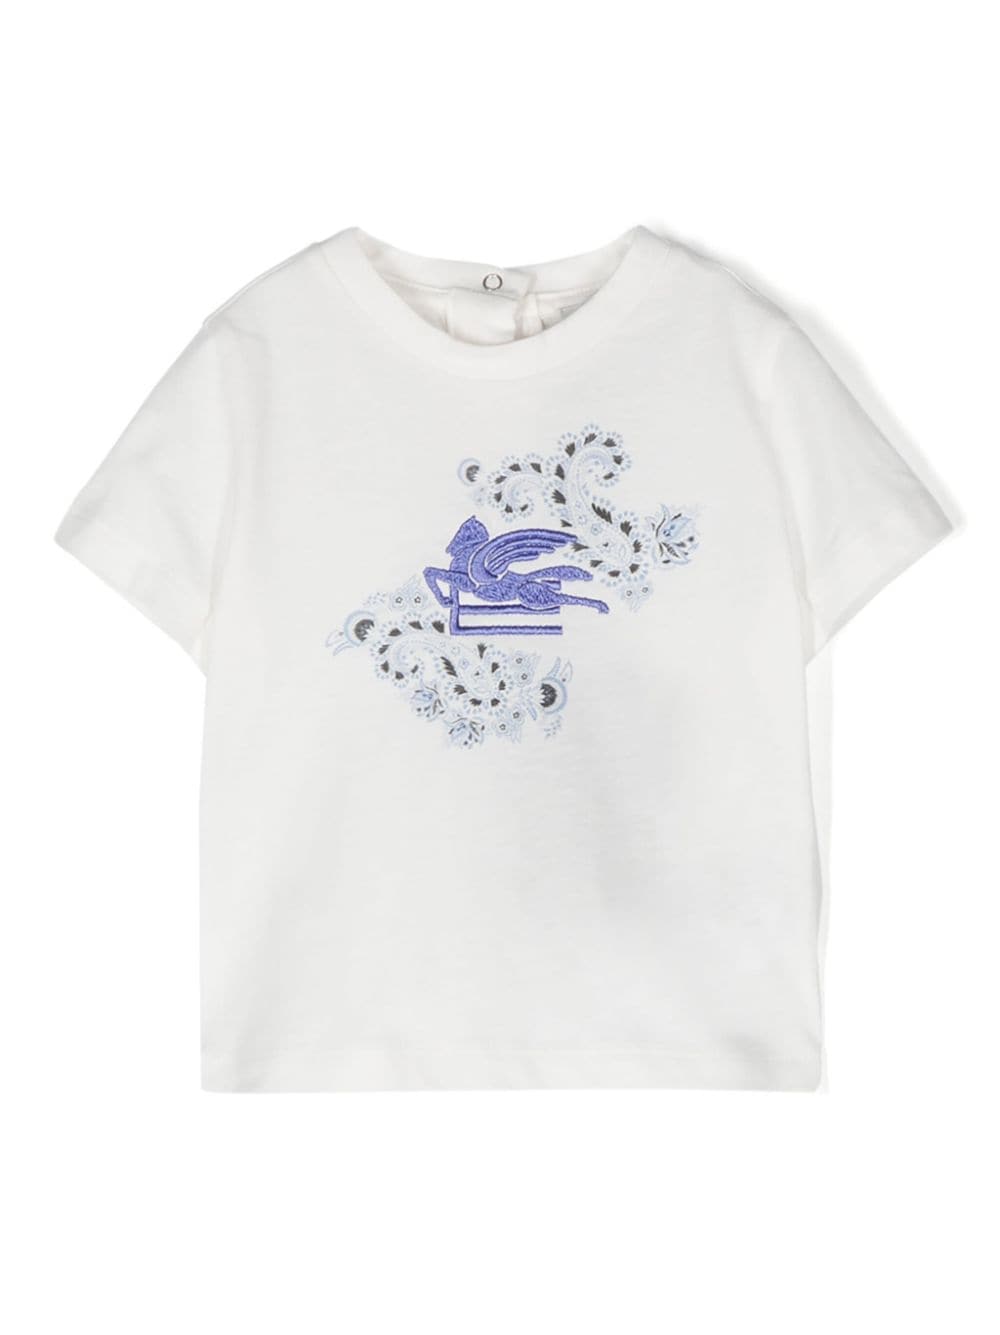 White t-shirt for baby girls with logo